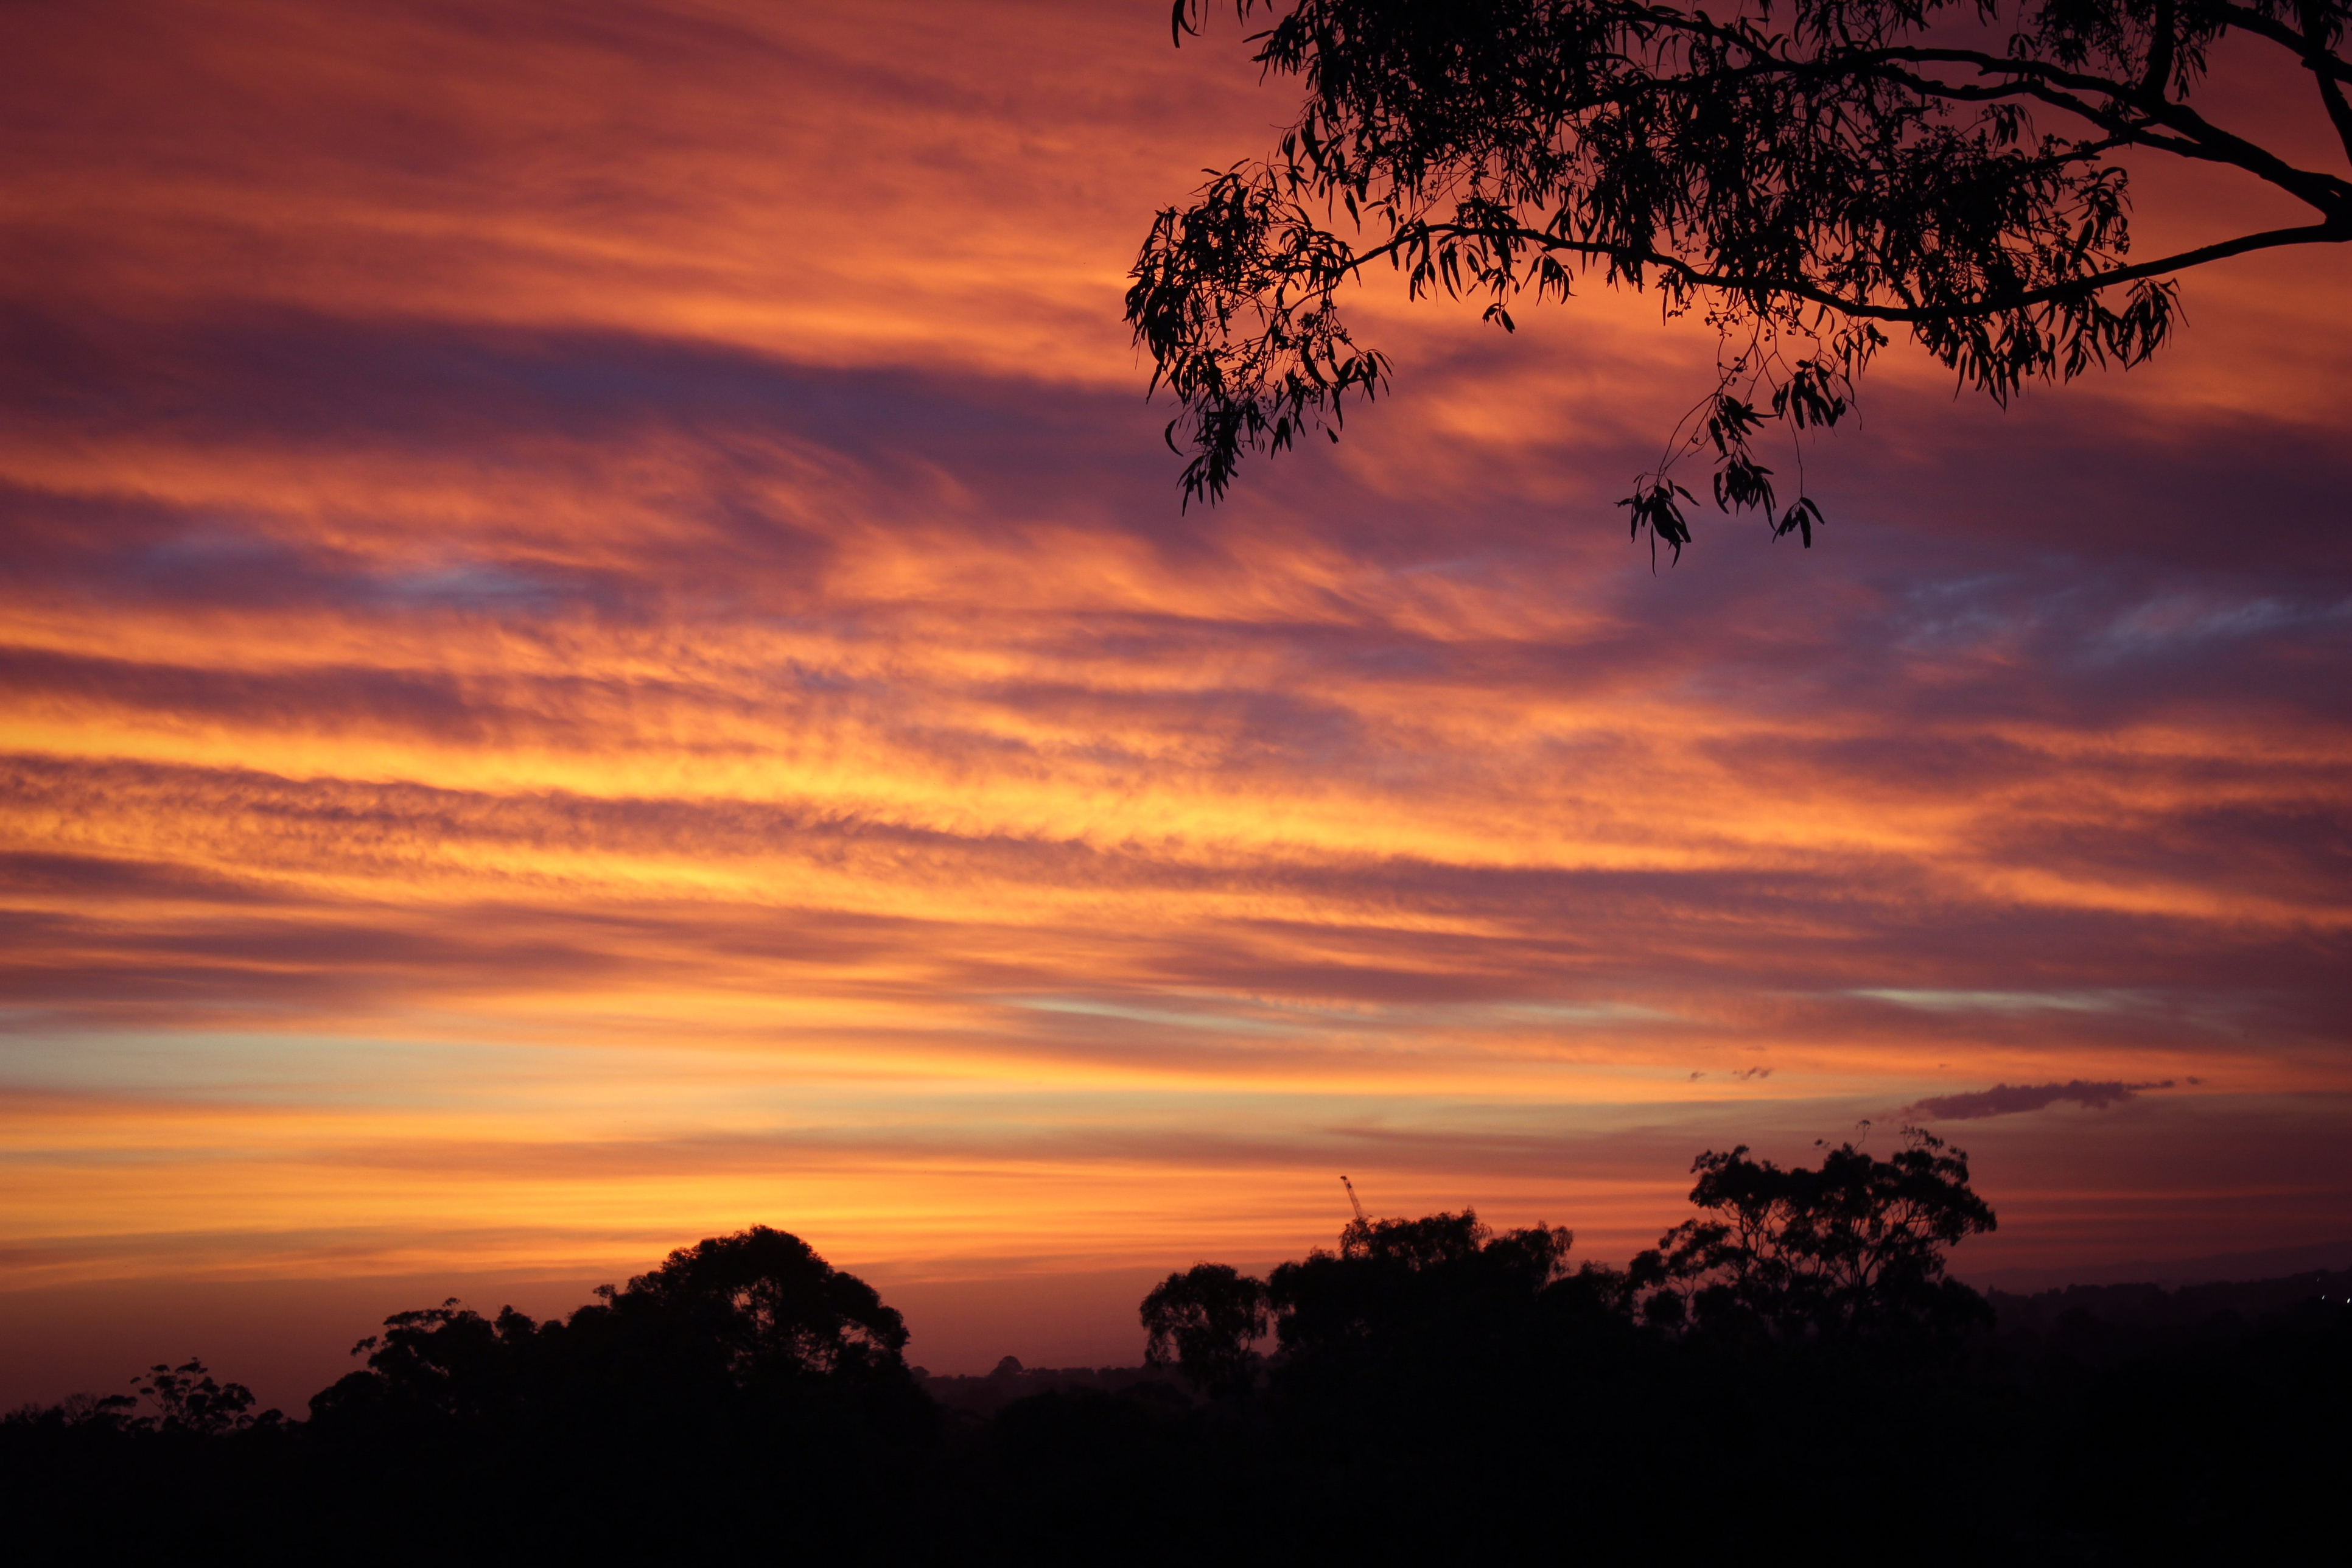 An amazing sunset over native forest makes for the perfect end to a productive day